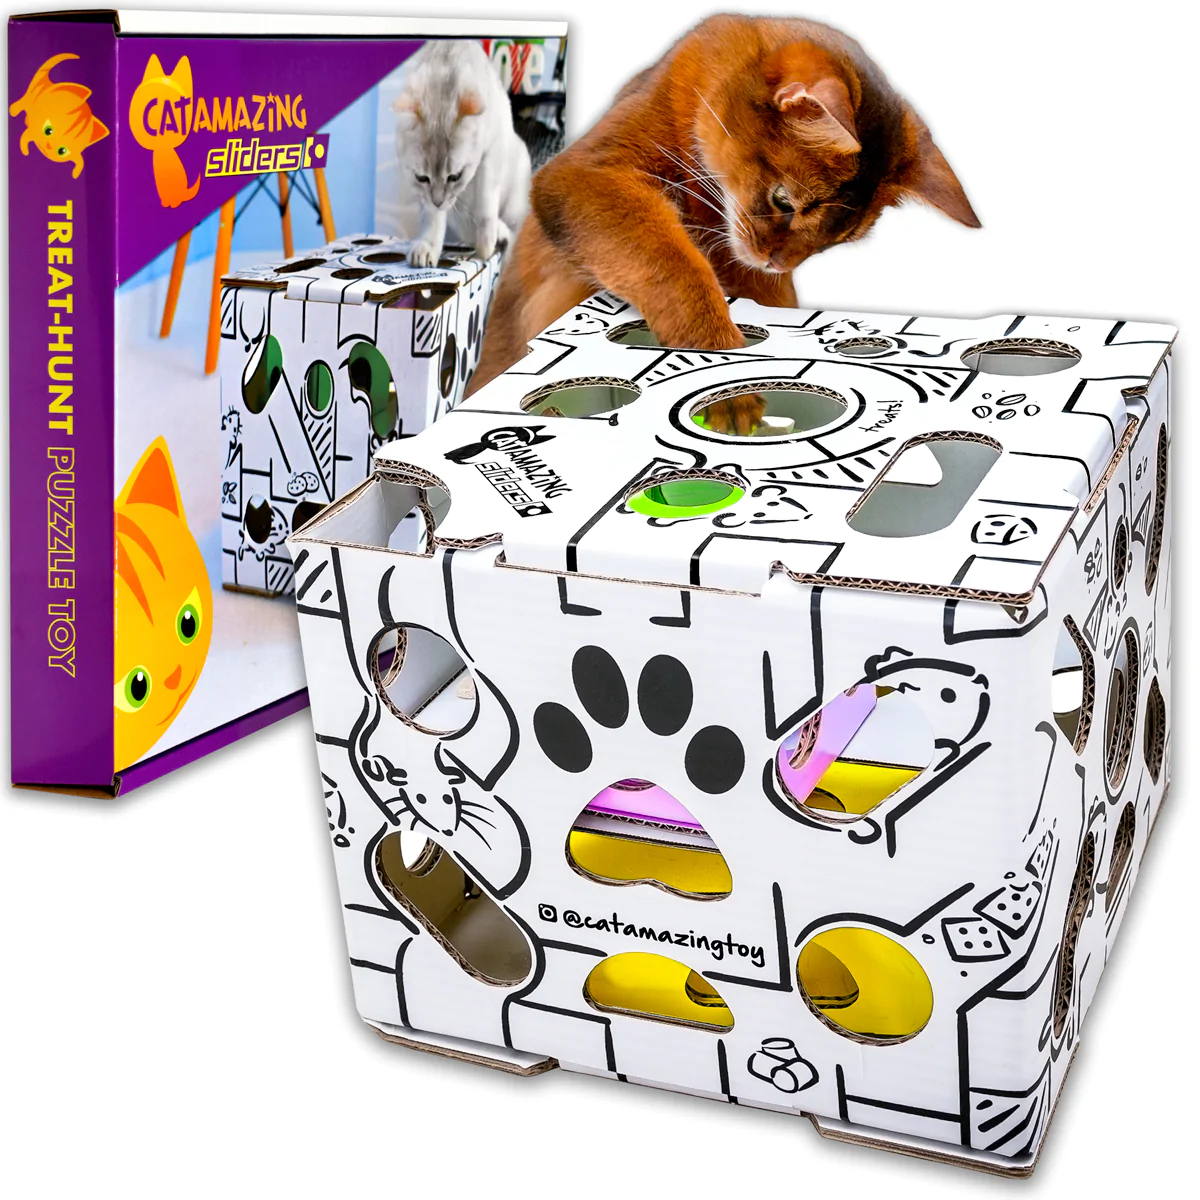 Check out These Top Gifts for Animal Lovers